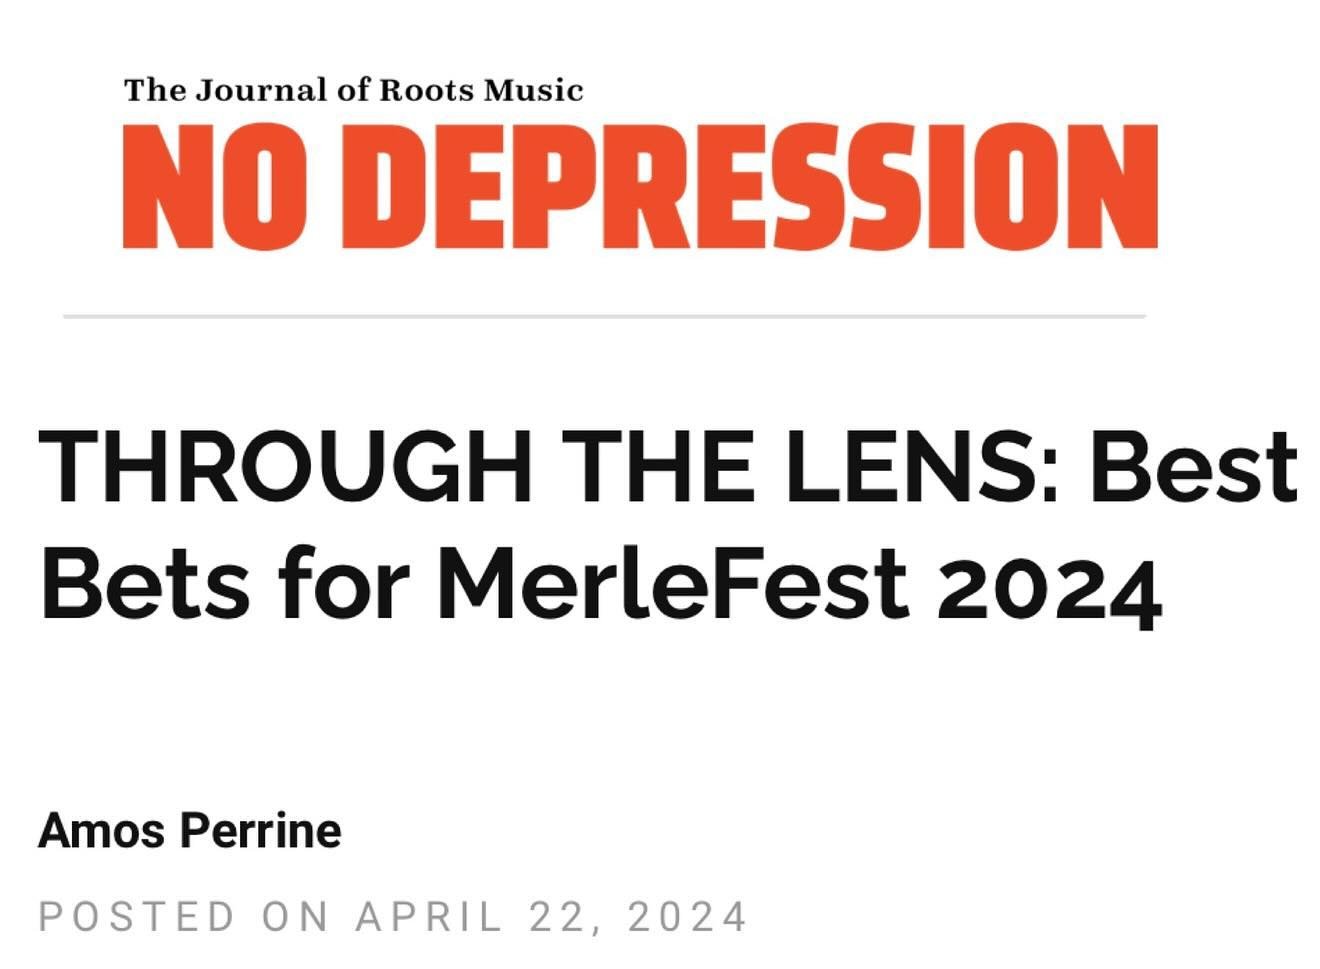 Well that&rsquo;s awful nice!! ❤️ Thanks so much @nodepression for including Nefesh Mountain in the &ldquo;Best Bets for Merlefest 2024&rdquo; ! 🎶🙏🏼

We can&rsquo;t wait ! @merlefest